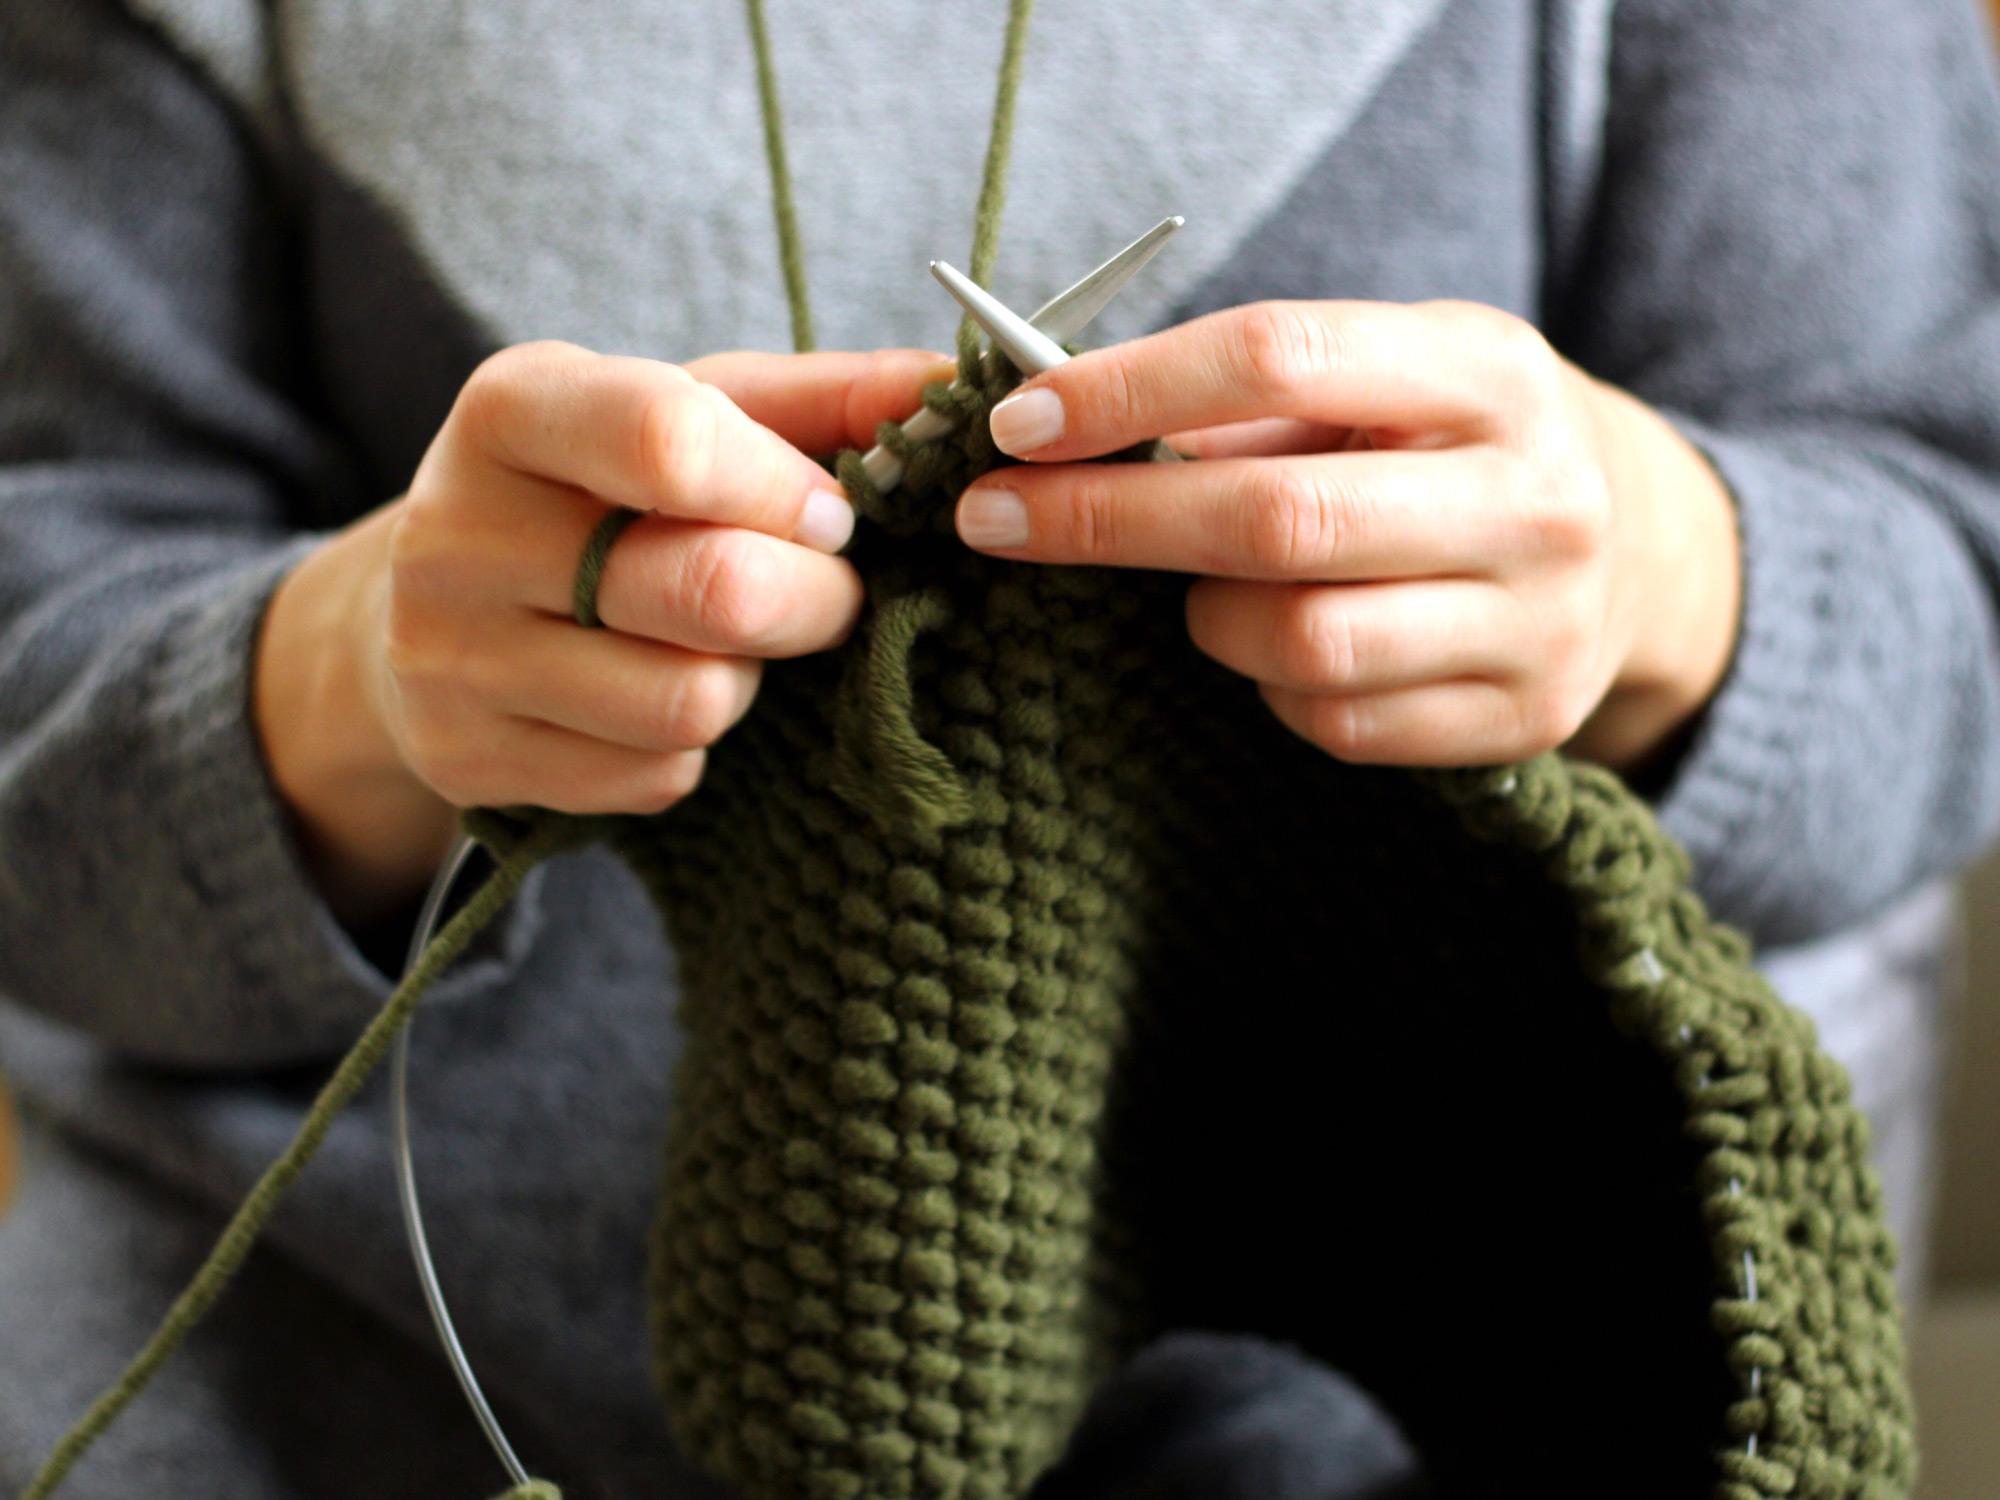 Close-Up Of Woman Hands Knitting